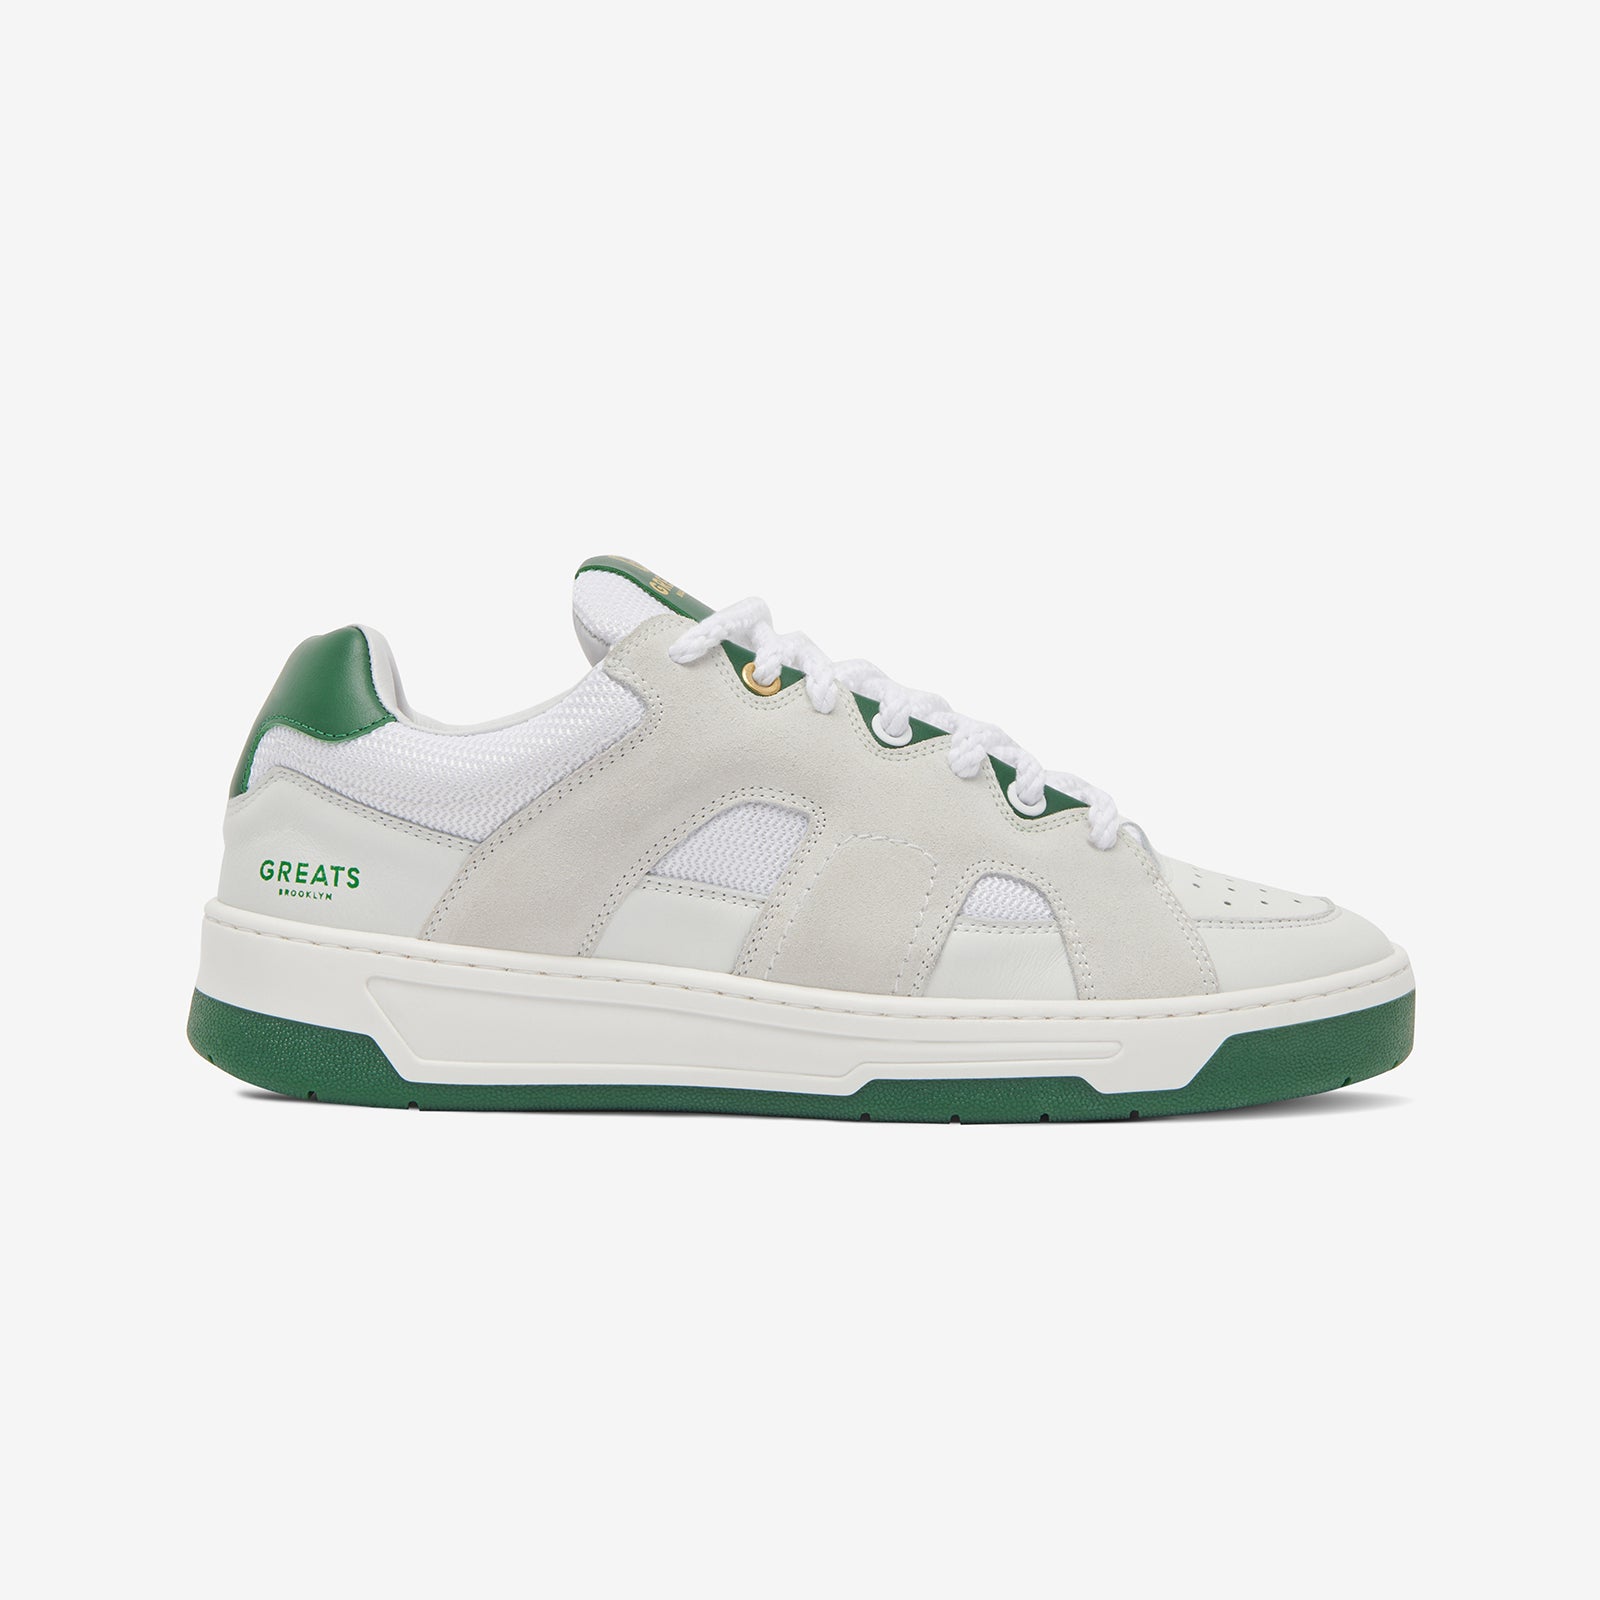 GREATS The Cooper Low Skate - Blanco Green - male - Size: 9.5